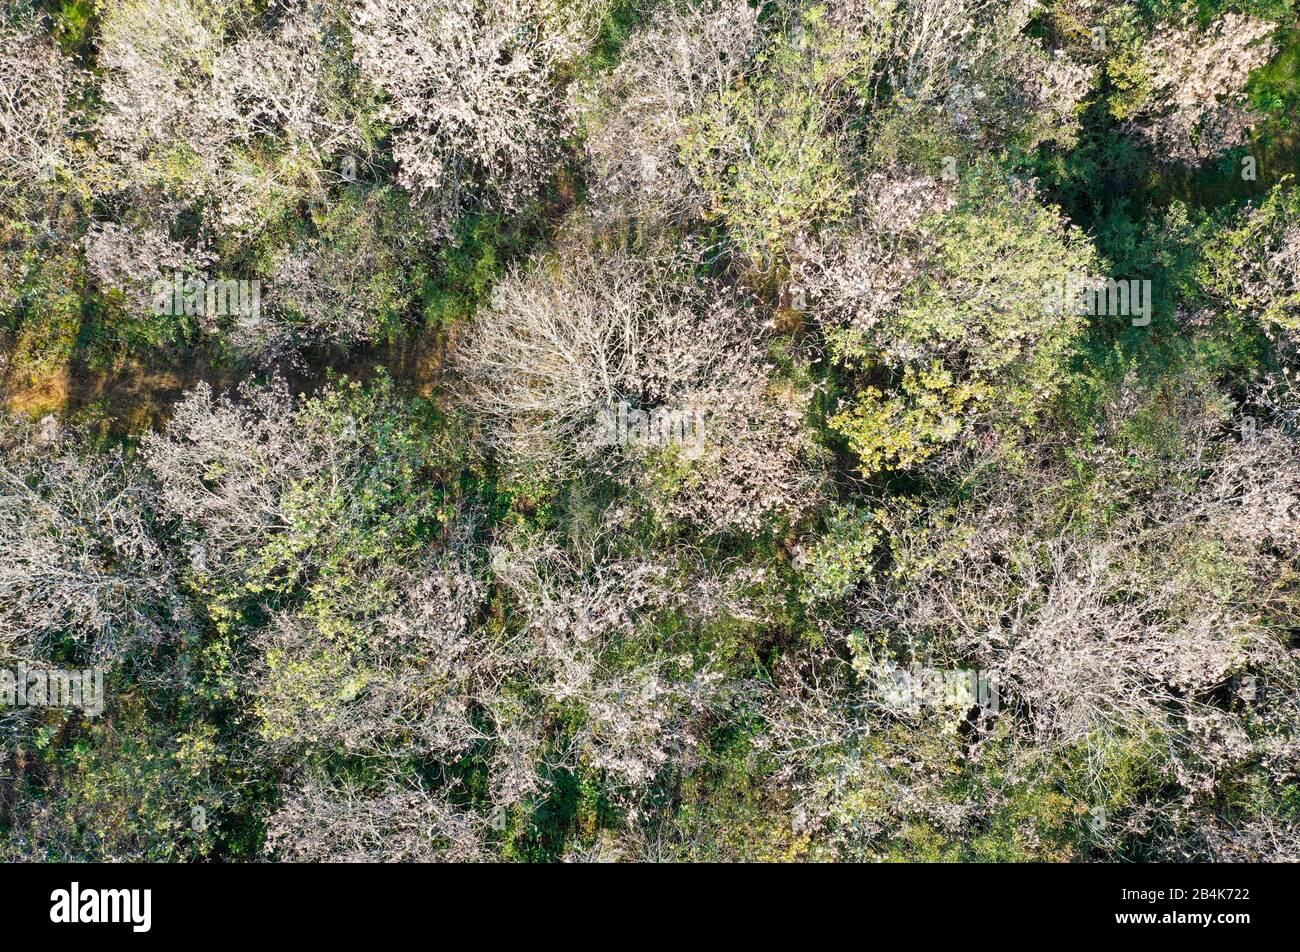 Europe, Germany, Hesse, nature park Lahn-Dill-Bergland, Gladenbach, dry damages of pine and oak by fungal and bark beetle infestation, Stock Photo